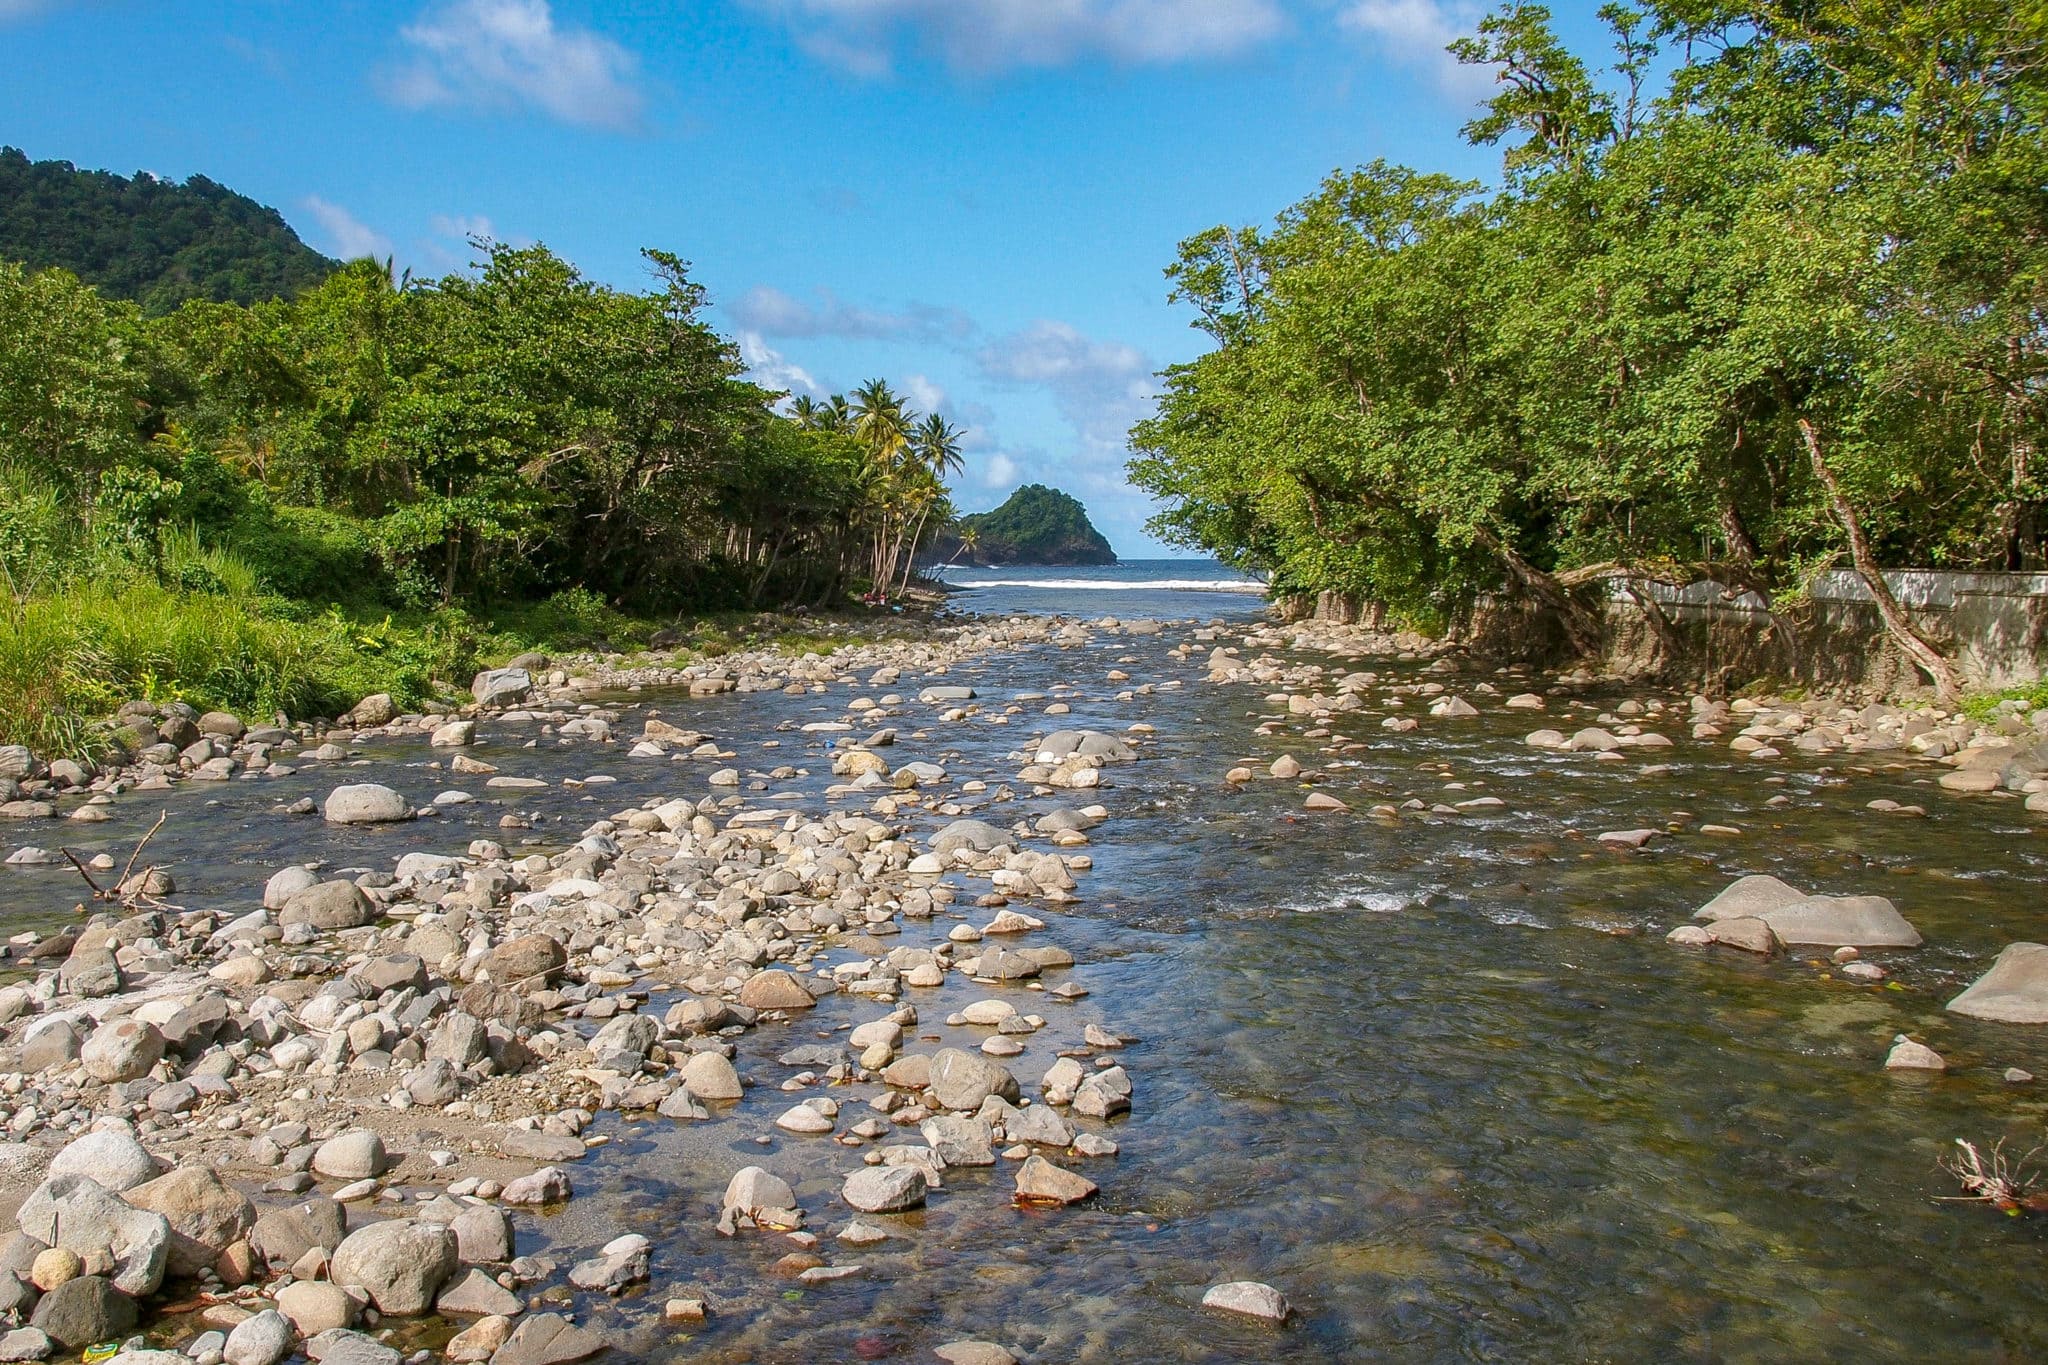 The Maroons of Dominica often raided the colonial plantation near this spot at the mouth of the Rosalie River | SBPR